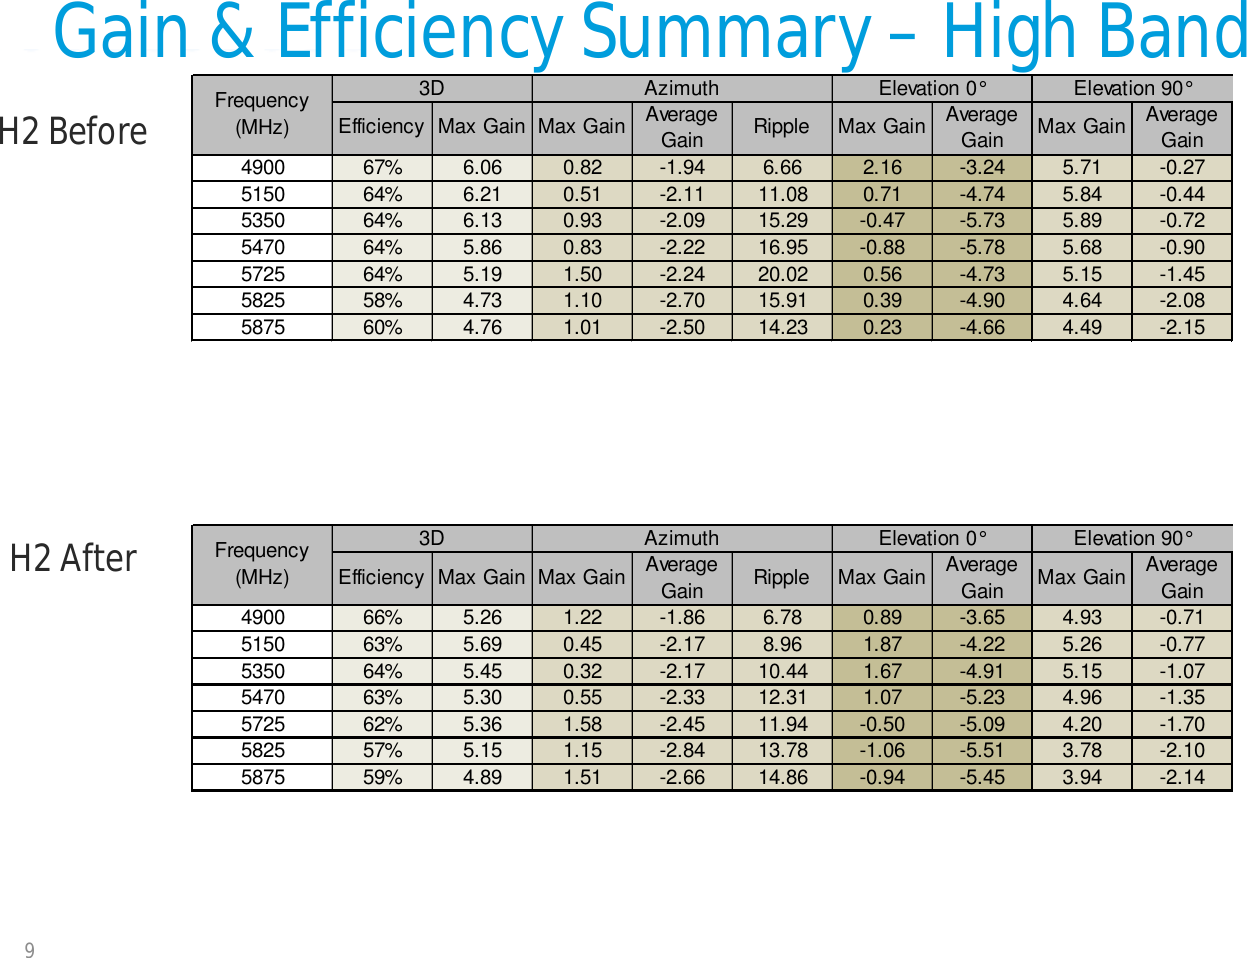 Gain &amp; Efficiency Summary –High Band9H2 BeforeH2 AfterEfficiencyMax GainMax Gain Average Gain Ripple Max Gain Average Gain Max Gain Average Gain4900 67% 6.06 0.82 -1.94 6.66 2.16 -3.24 5.71 -0.275150 64% 6.21 0.51 -2.11 11.08 0.71 -4.74 5.84 -0.445350 64% 6.13 0.93 -2.09 15.29 -0.47 -5.73 5.89 -0.725470 64% 5.86 0.83 -2.22 16.95 -0.88 -5.78 5.68 -0.905725 64% 5.19 1.50 -2.24 20.02 0.56 -4.73 5.15 -1.455825 58% 4.73 1.10 -2.70 15.91 0.39 -4.90 4.64 -2.085875 60% 4.76 1.01 -2.50 14.23 0.23 -4.66 4.49 -2.153DFrequency (MHz)Azimuth Elevation 0° Elevation 90°EfficiencyMax GainMax Gain Average Gain Ripple Max Gain Average Gain Max Gain Average Gain4900 66% 5.26 1.22 -1.86 6.78 0.89 -3.65 4.93 -0.715150 63% 5.69 0.45 -2.17 8.96 1.87 -4.22 5.26 -0.775350 64% 5.45 0.32 -2.17 10.44 1.67 -4.91 5.15 -1.075470 63% 5.30 0.55 -2.33 12.31 1.07 -5.23 4.96 -1.355725 62% 5.36 1.58 -2.45 11.94 -0.50 -5.09 4.20 -1.705825 57% 5.15 1.15 -2.84 13.78 -1.06 -5.51 3.78 -2.105875 59% 4.89 1.51 -2.66 14.86 -0.94 -5.45 3.94 -2.14Azimuth Elevation 0° Elevation 90°3DFrequency (MHz)